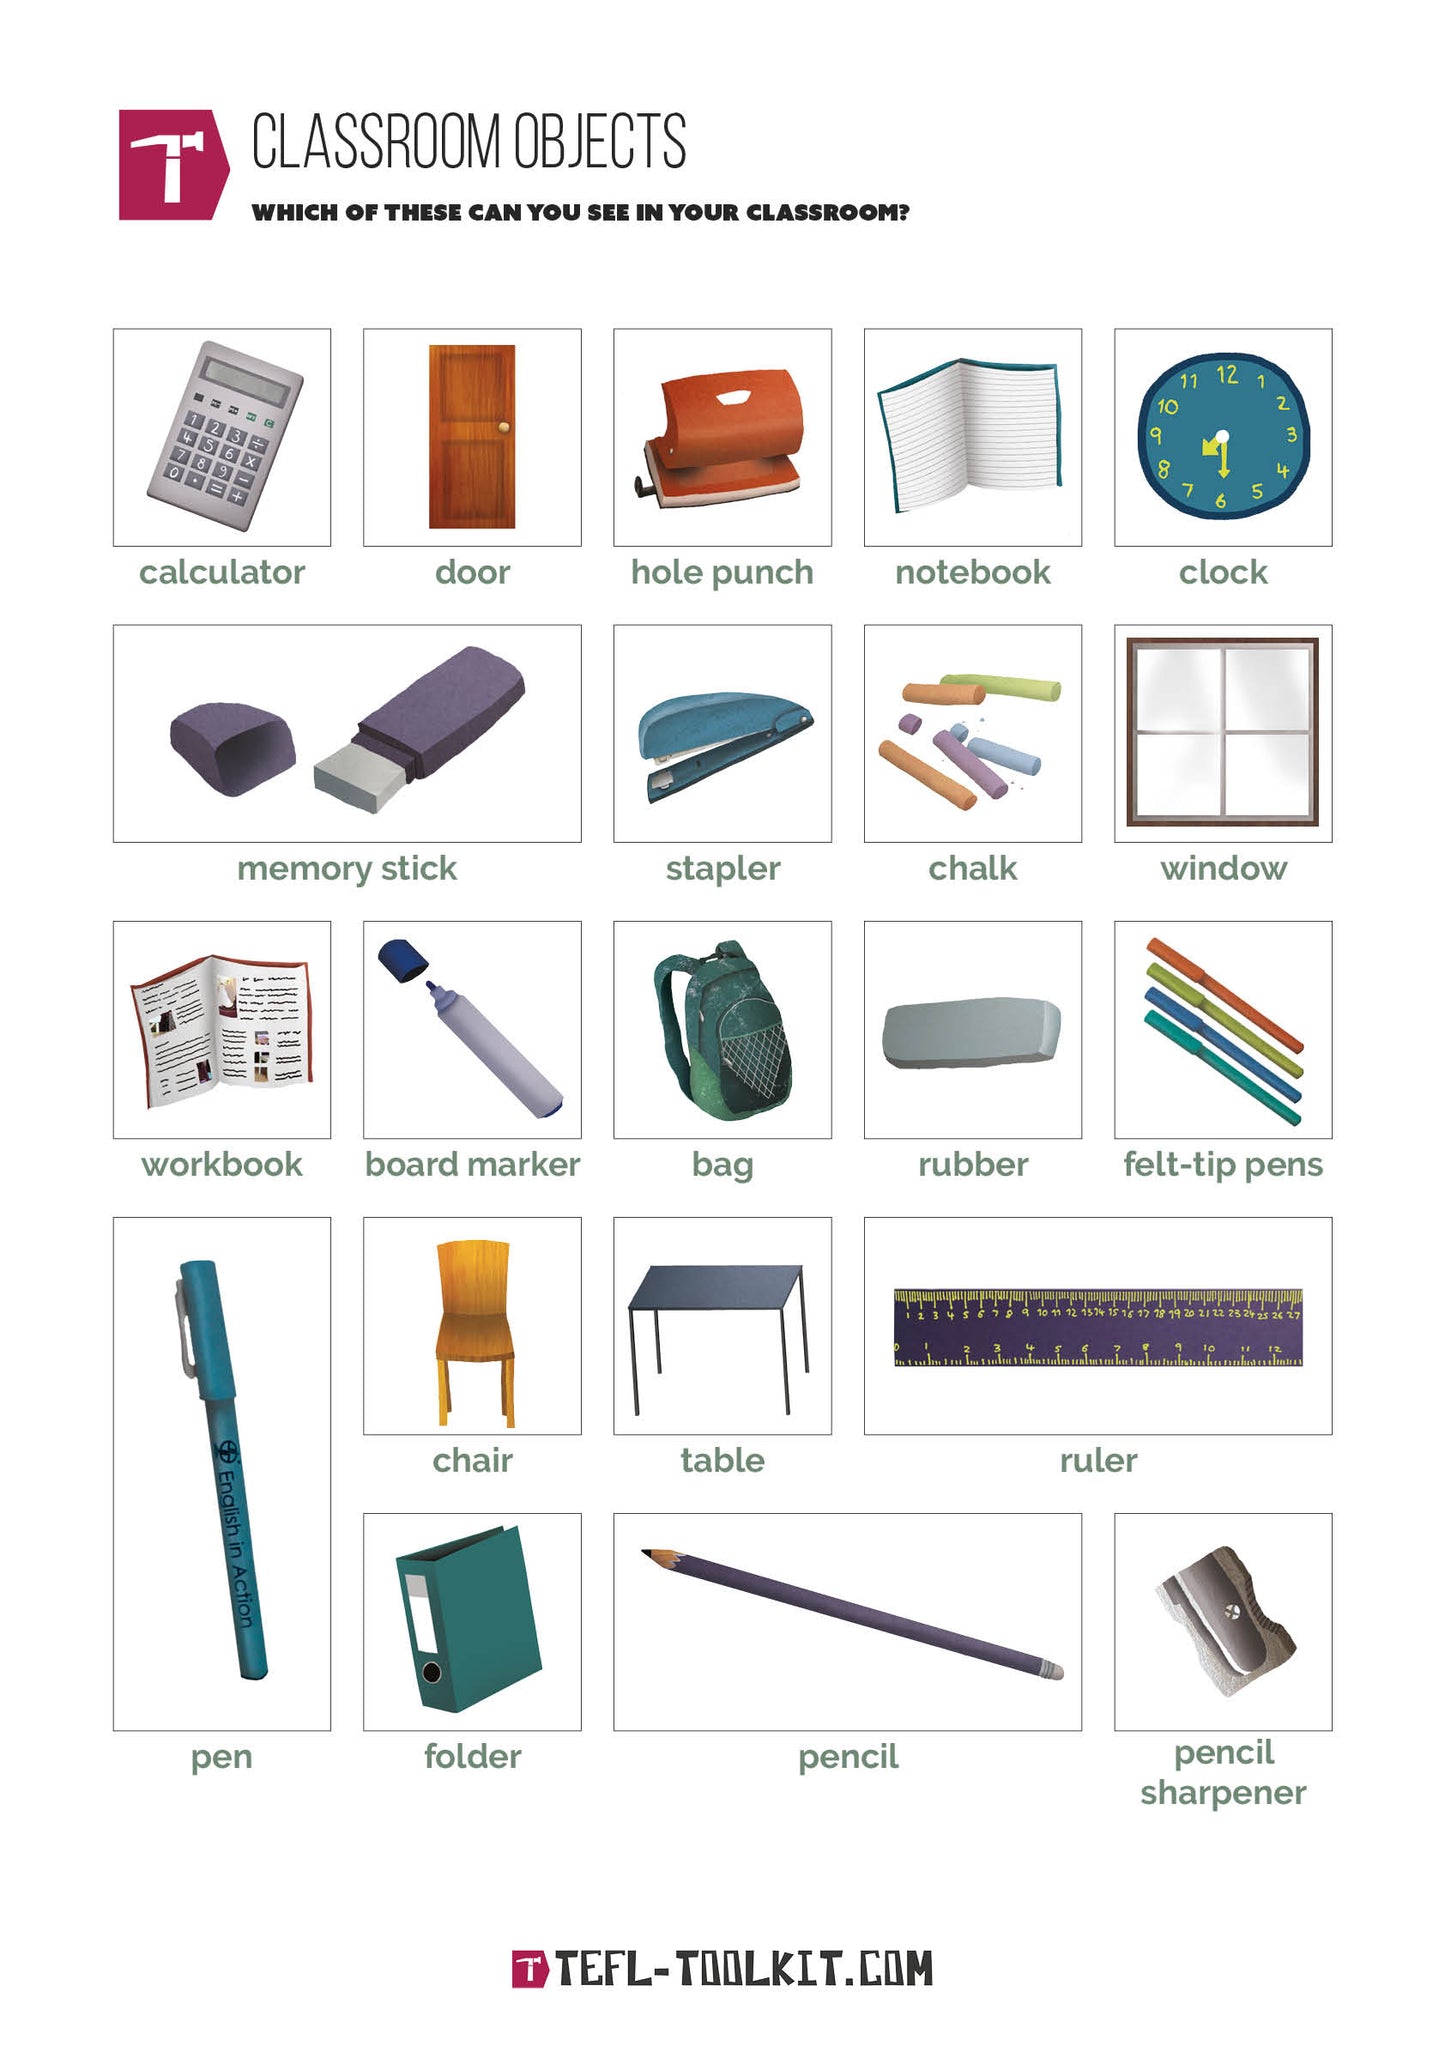 Classroom Objects | Virtual Worksheet and Poster - TEFL-Toolkit.com